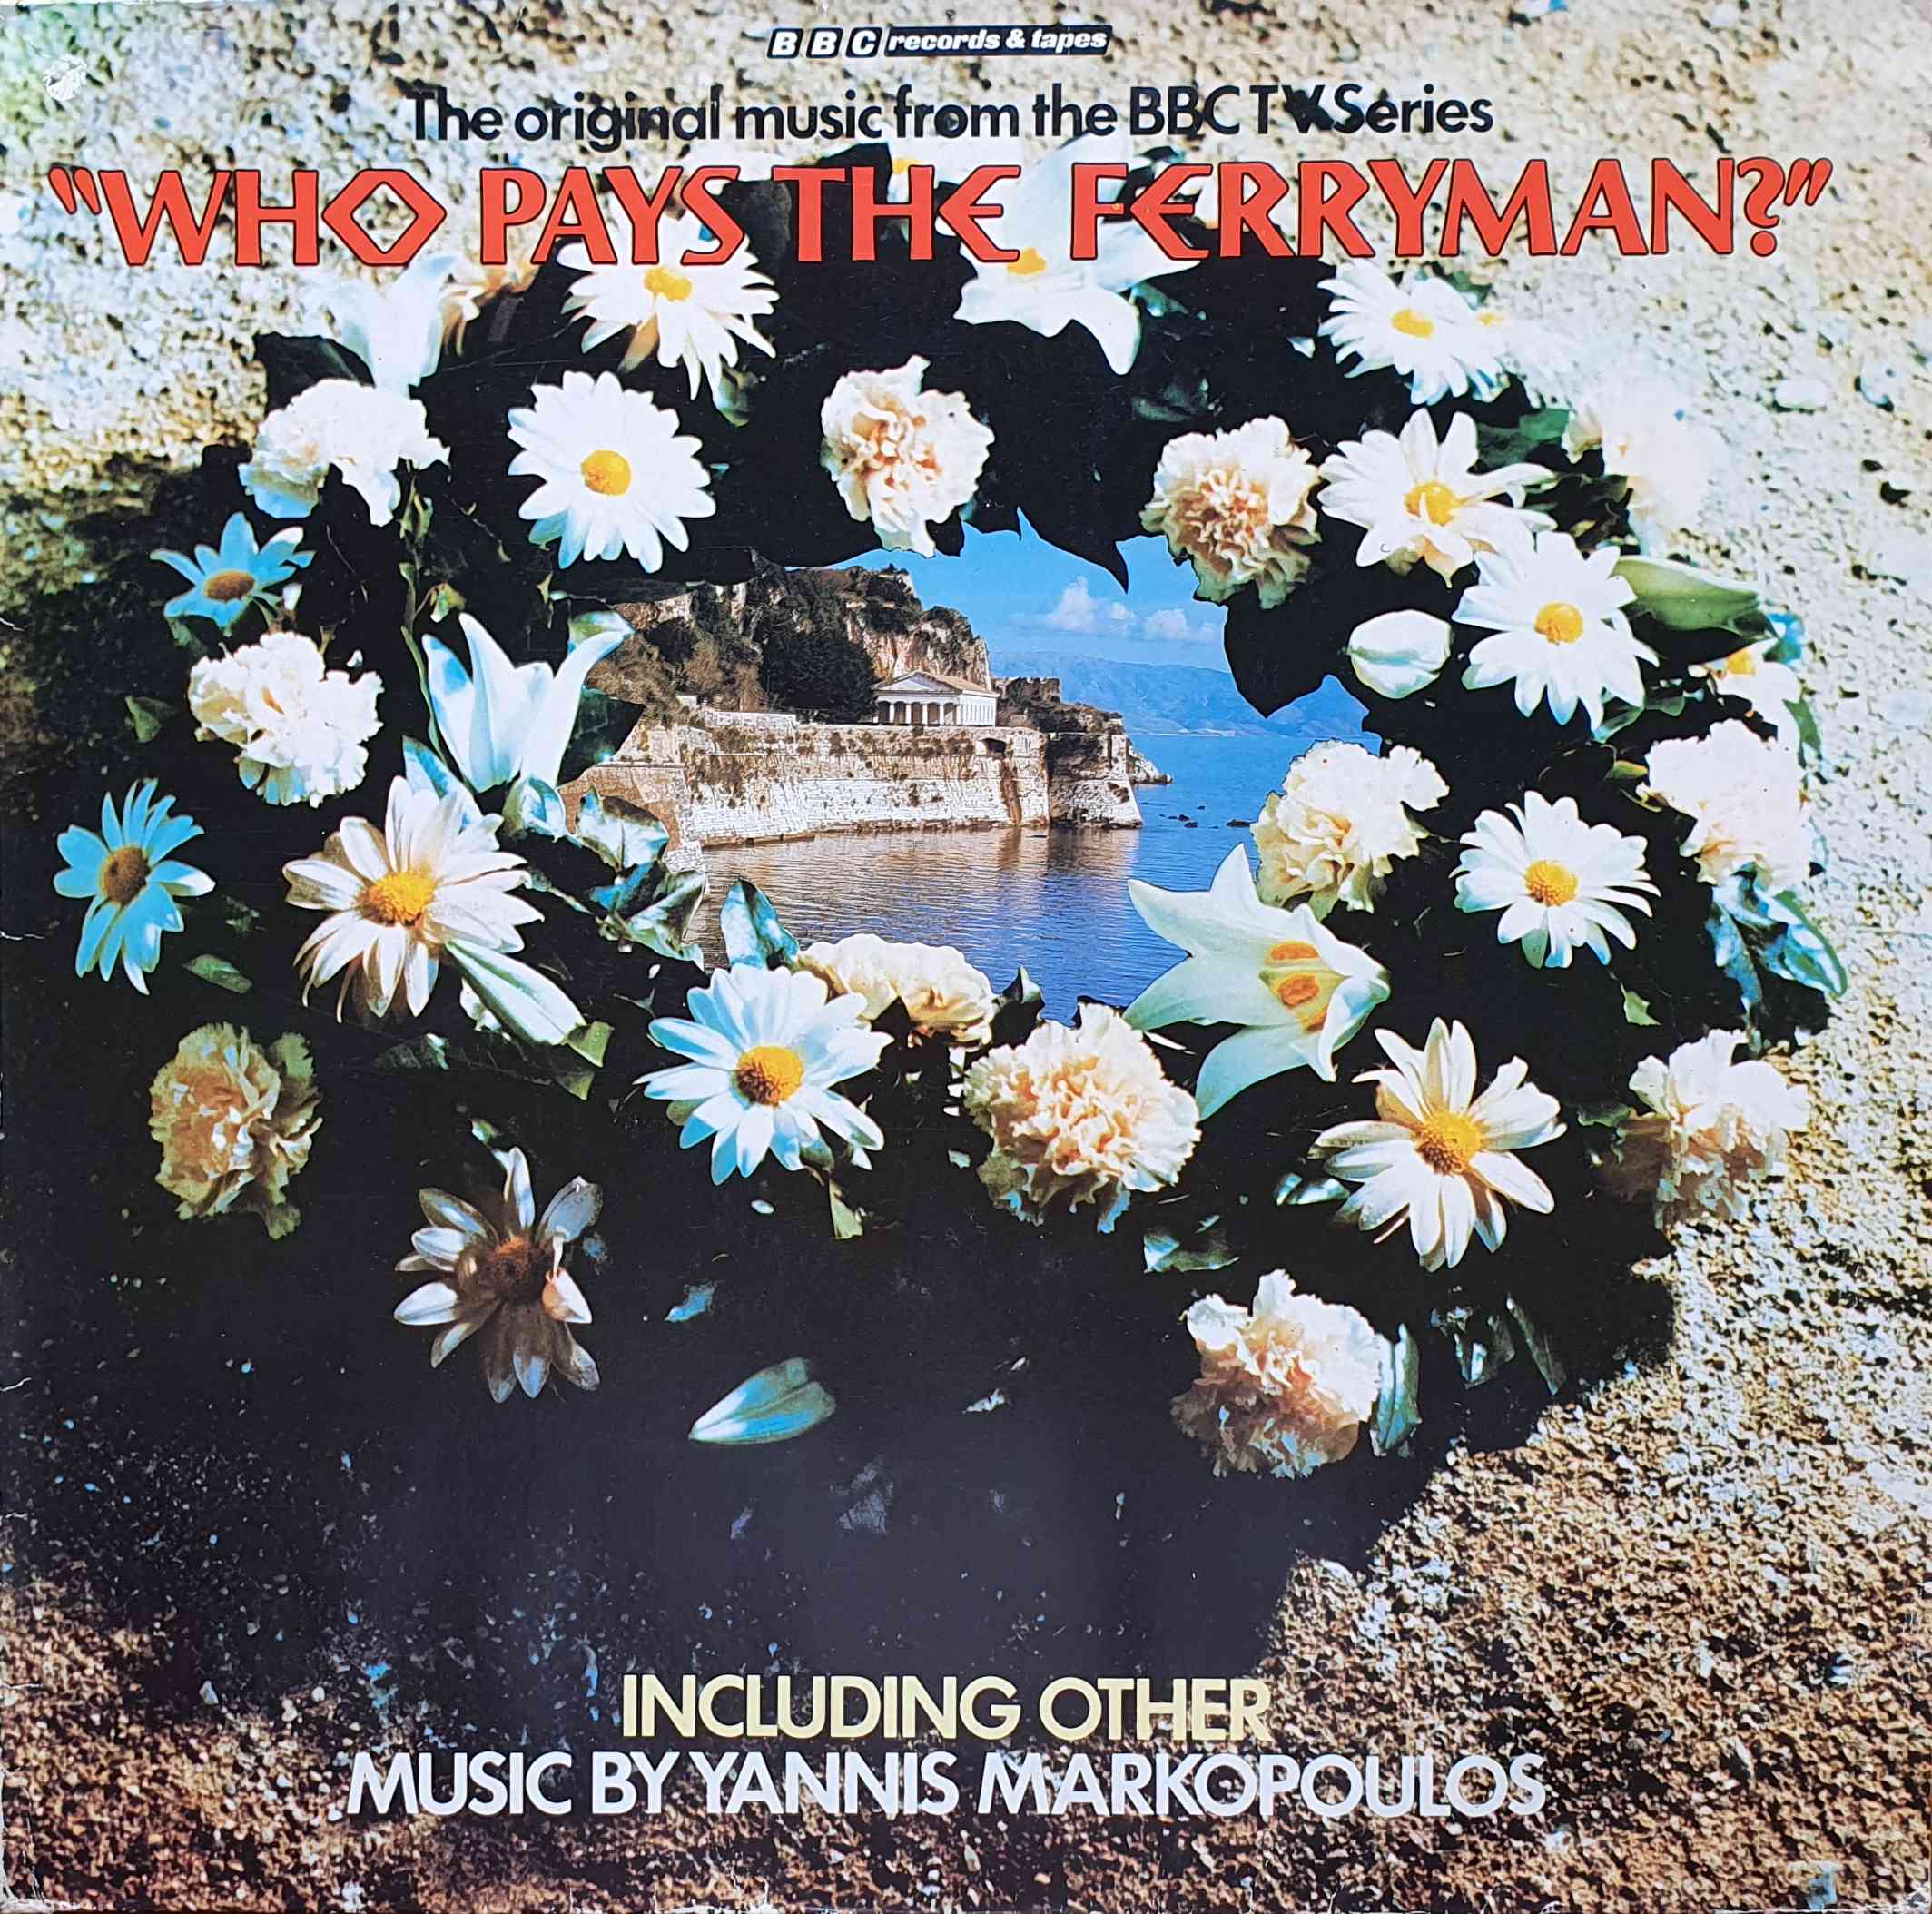 Picture of Who Pays The Ferryman? by artist Yannis Markopoulos from the BBC albums - Records and Tapes library